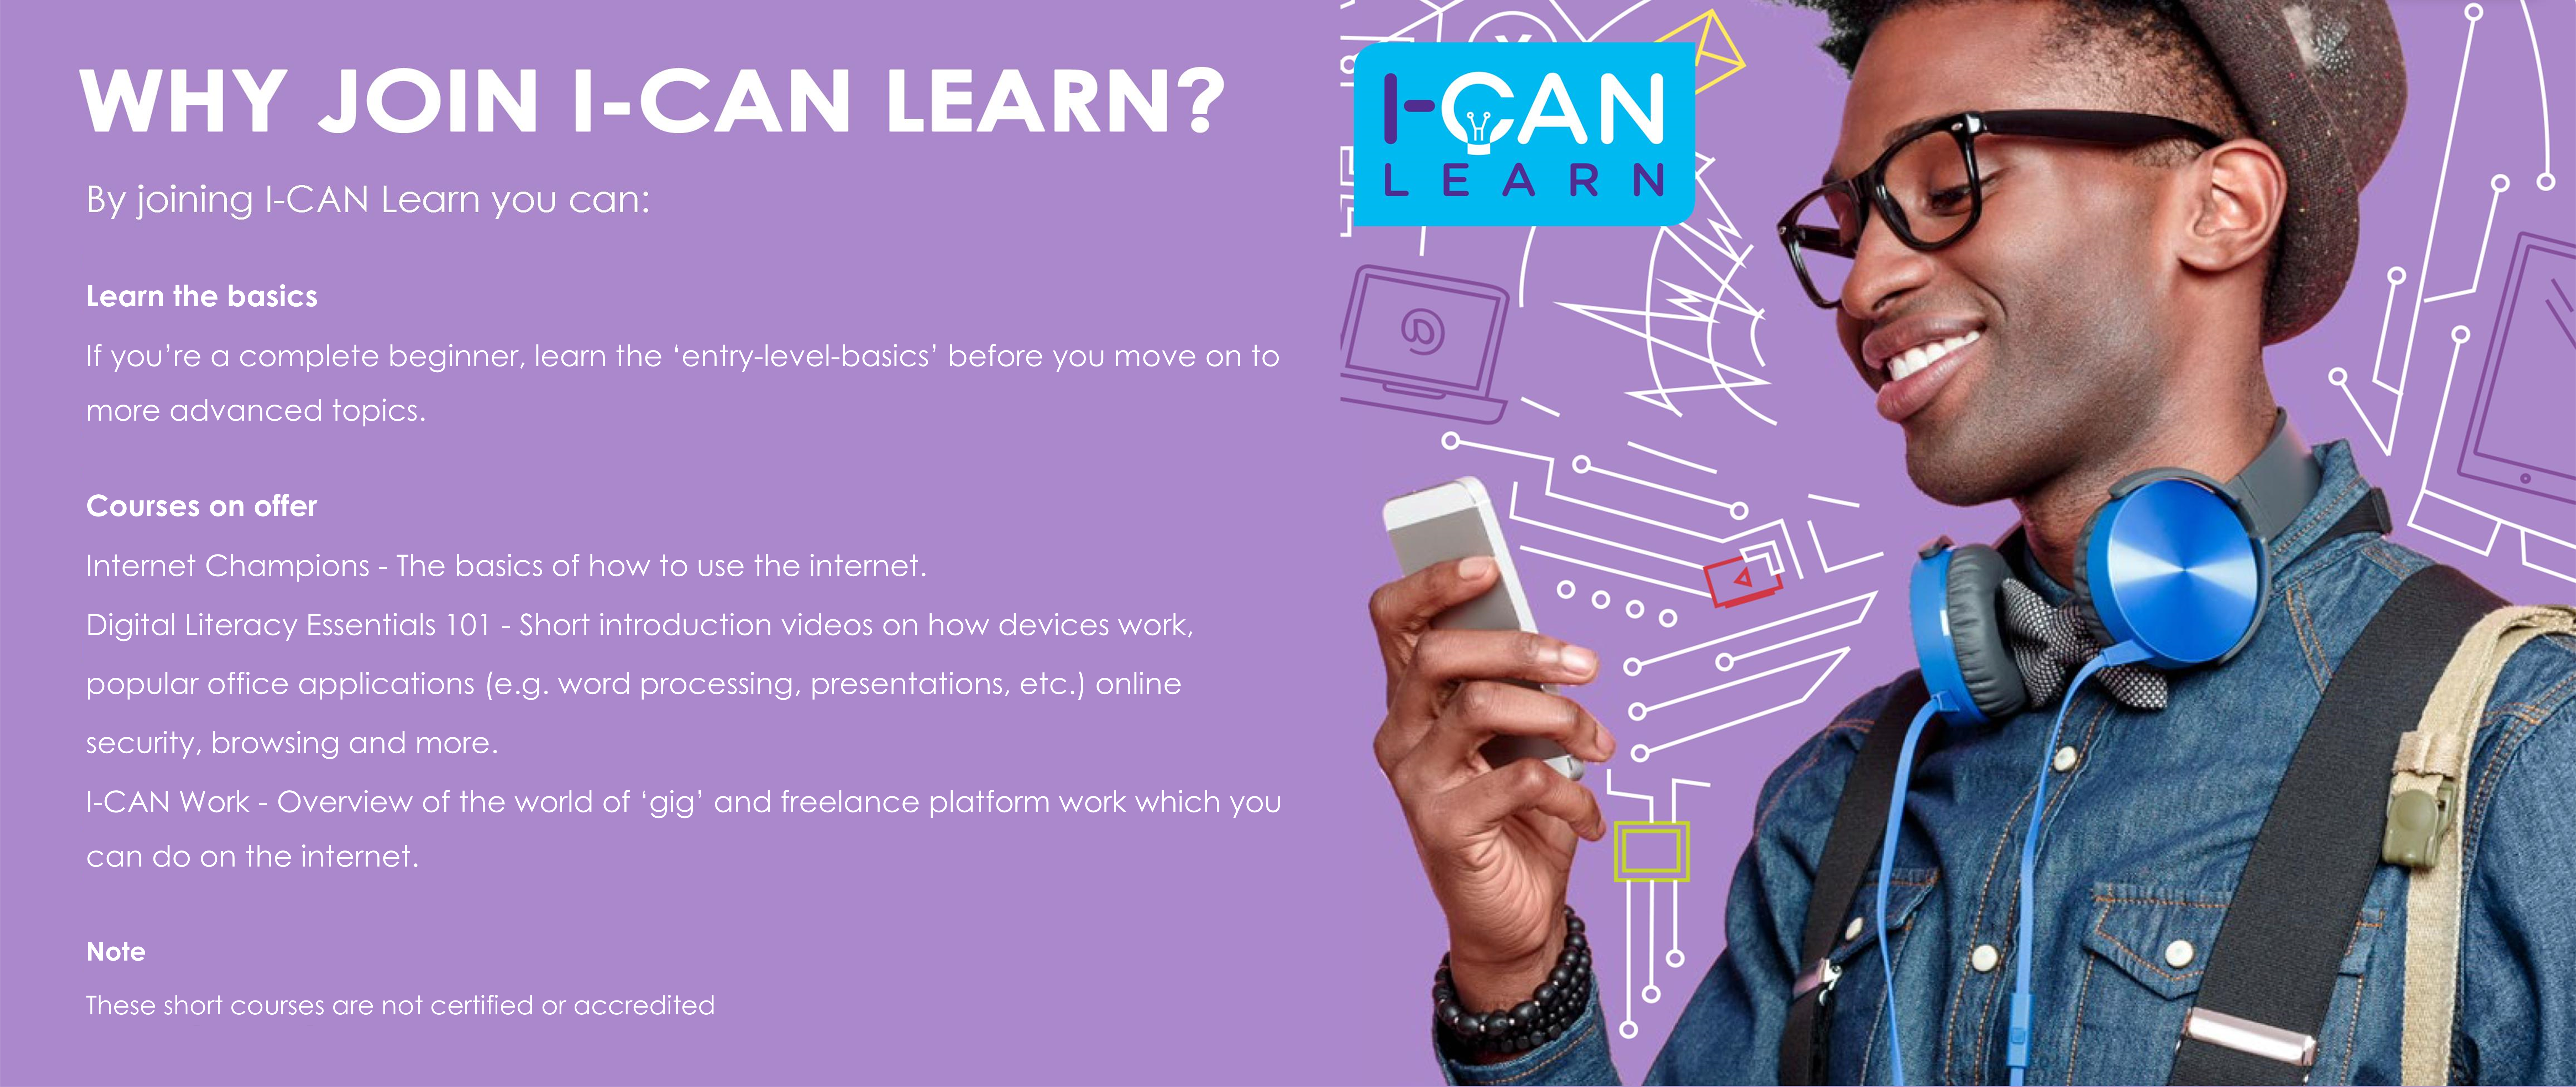 Why you should join I-CAN Learn